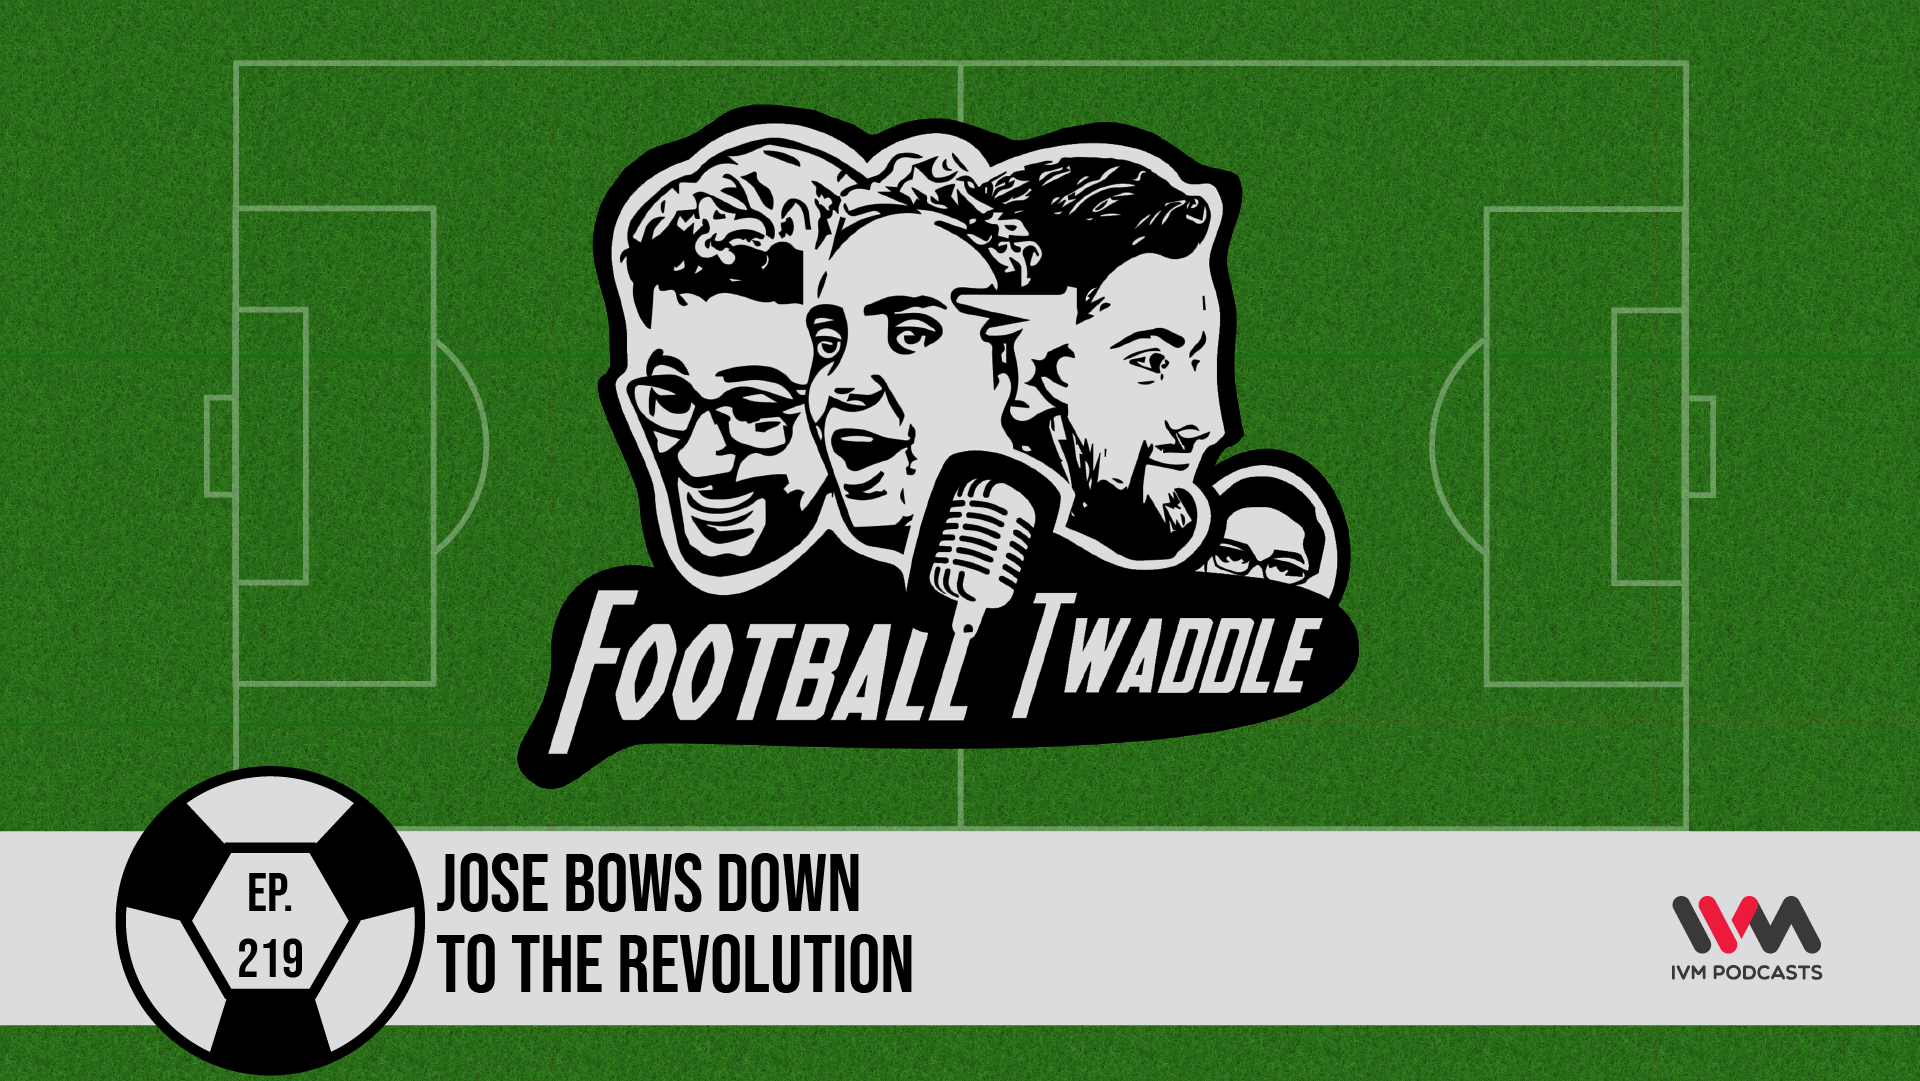 Jose Bows Down to the Revolution